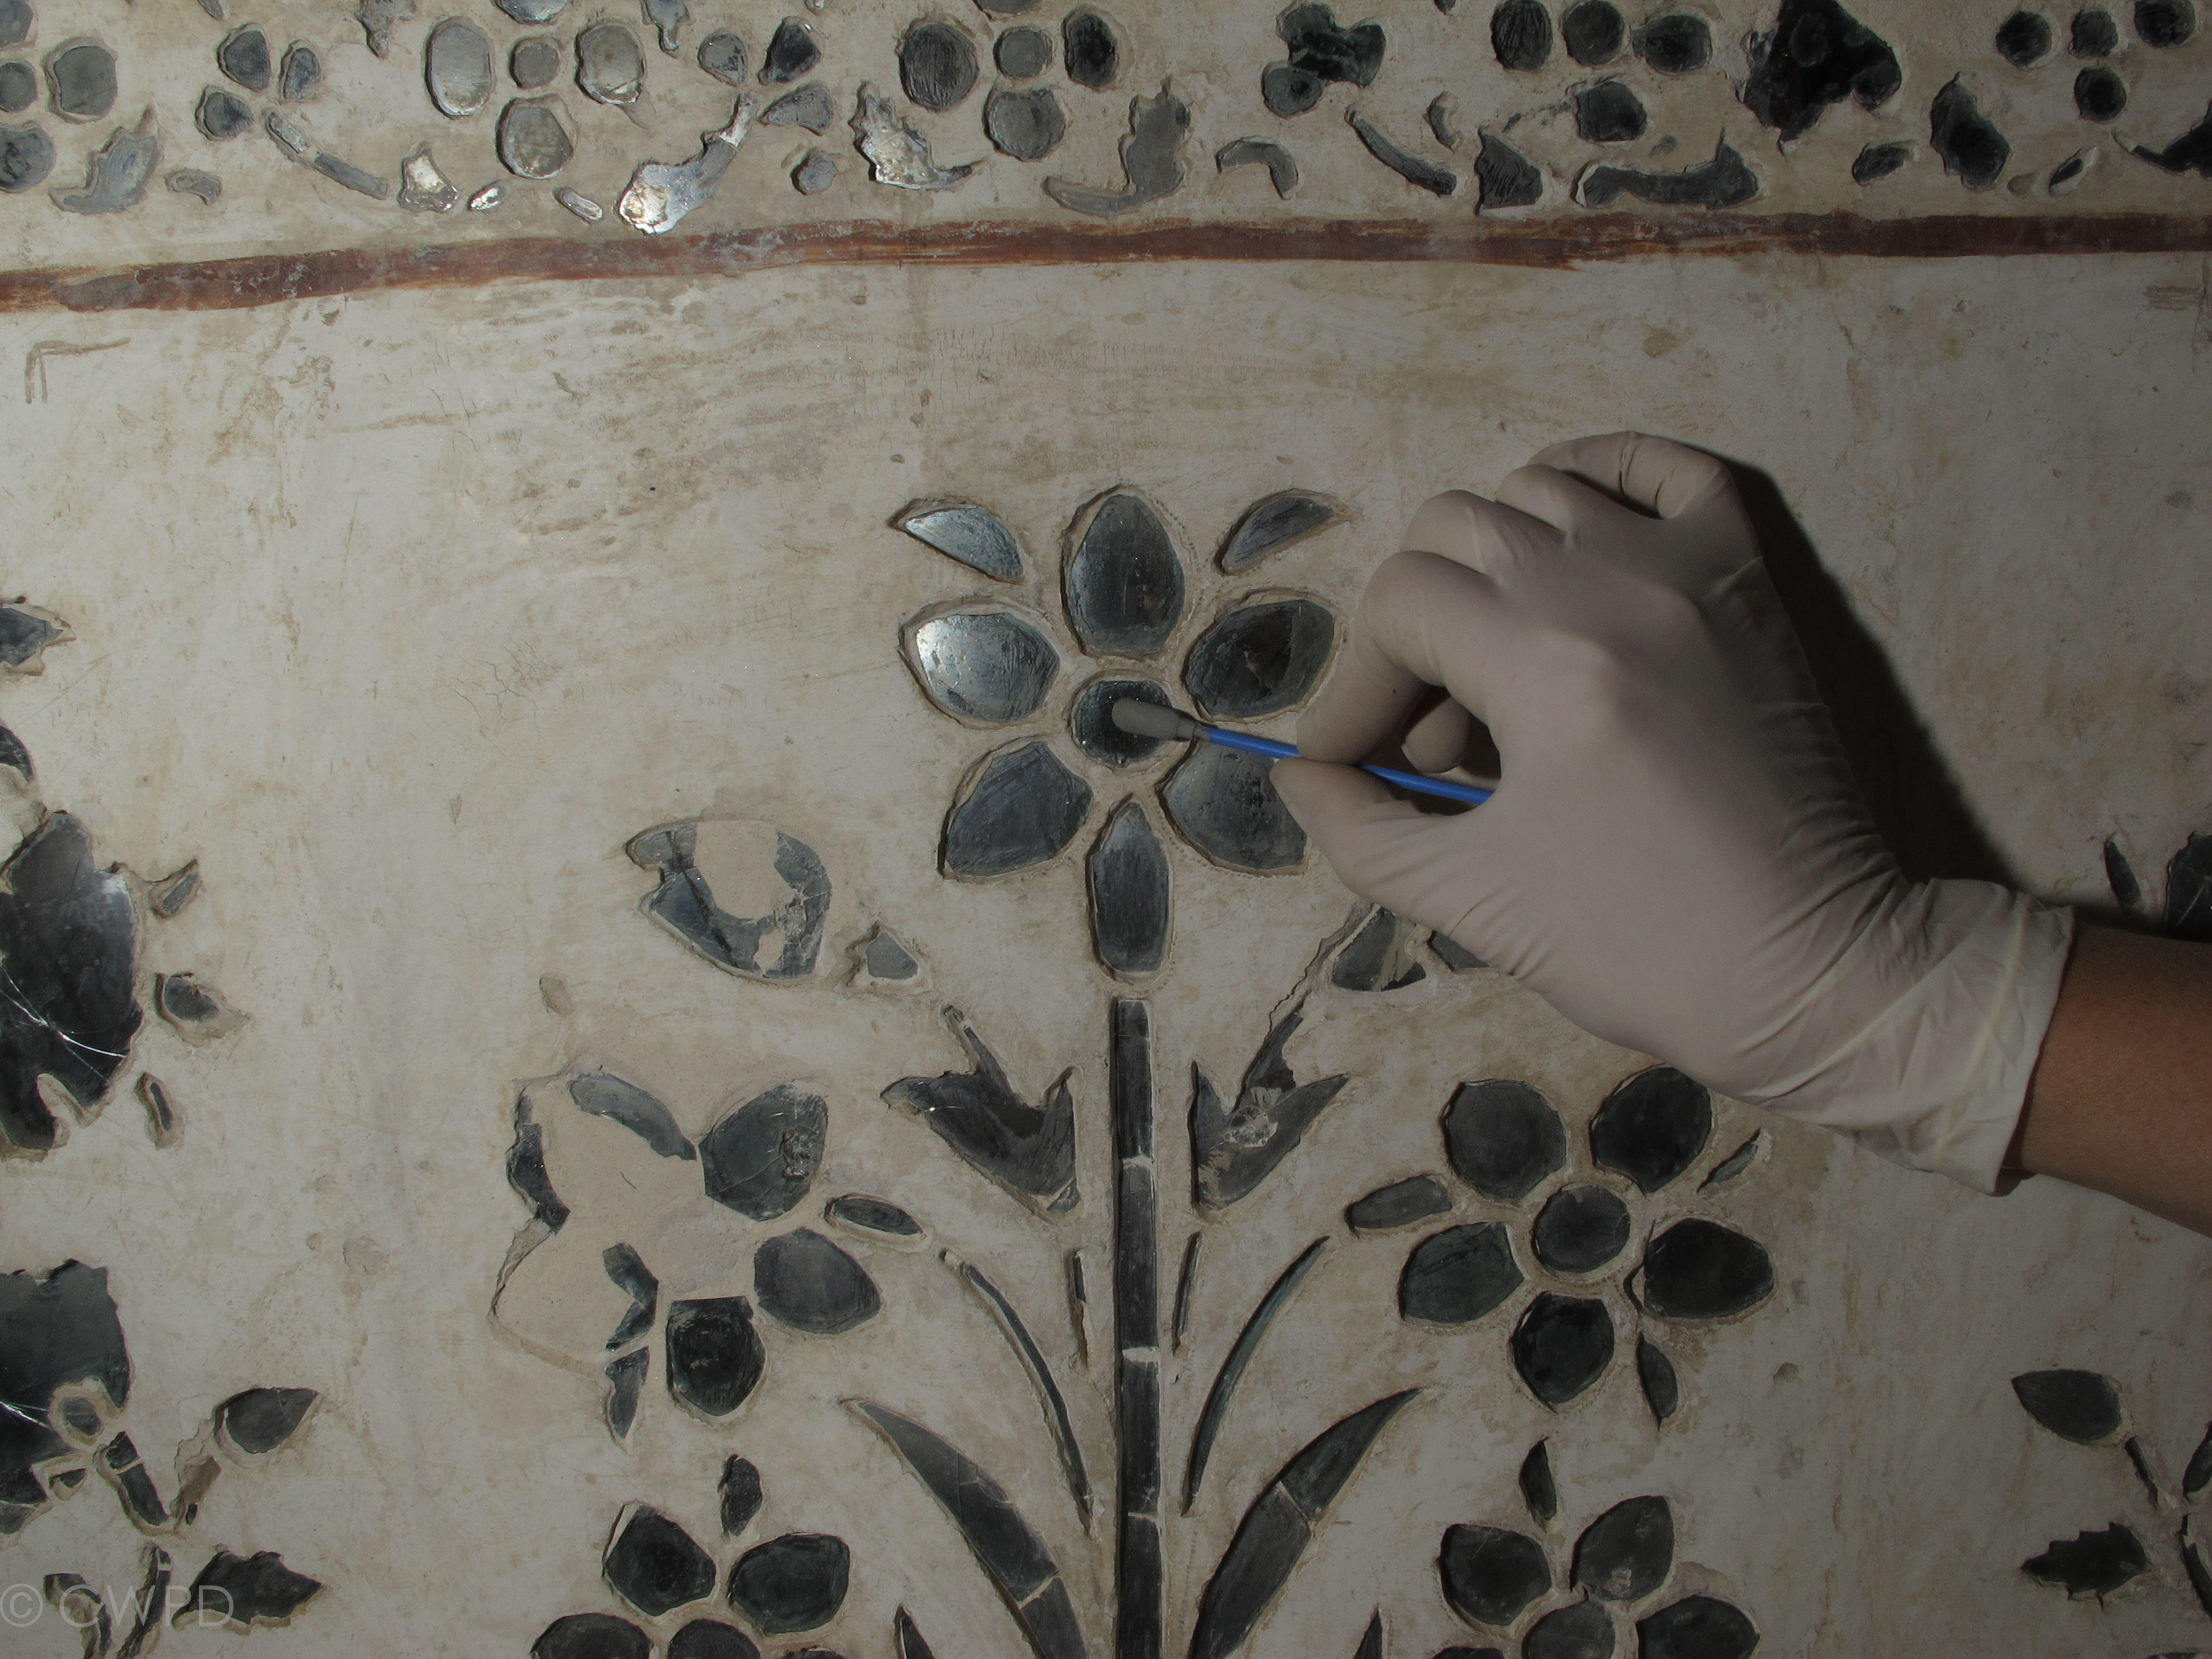  Tthe mirrored surfaces were similarly cleaned and polished.&nbsp;  Image © Courtauld CWPD 